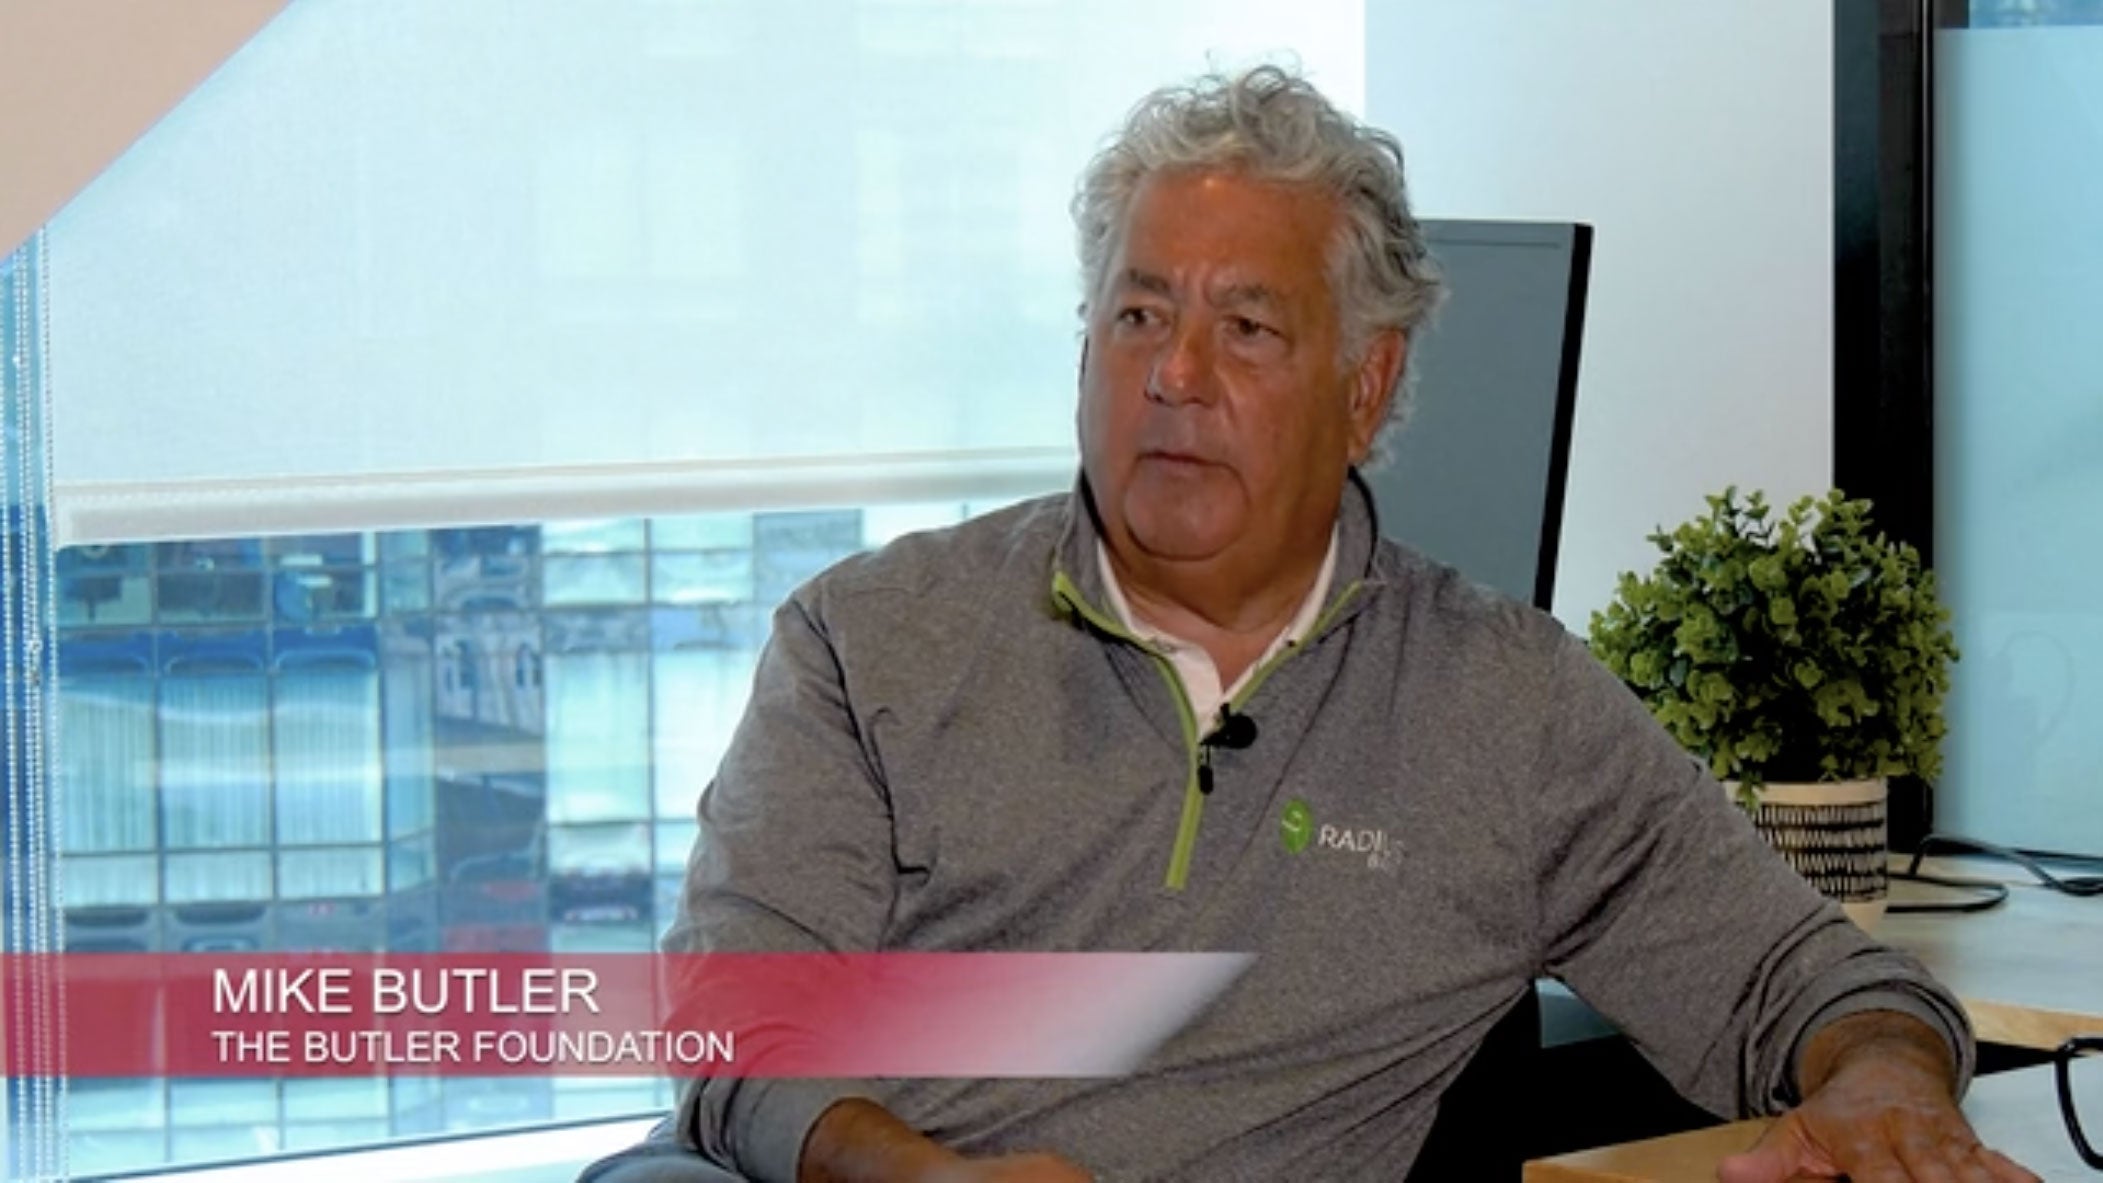 Load video: watch the Butler Foundation video